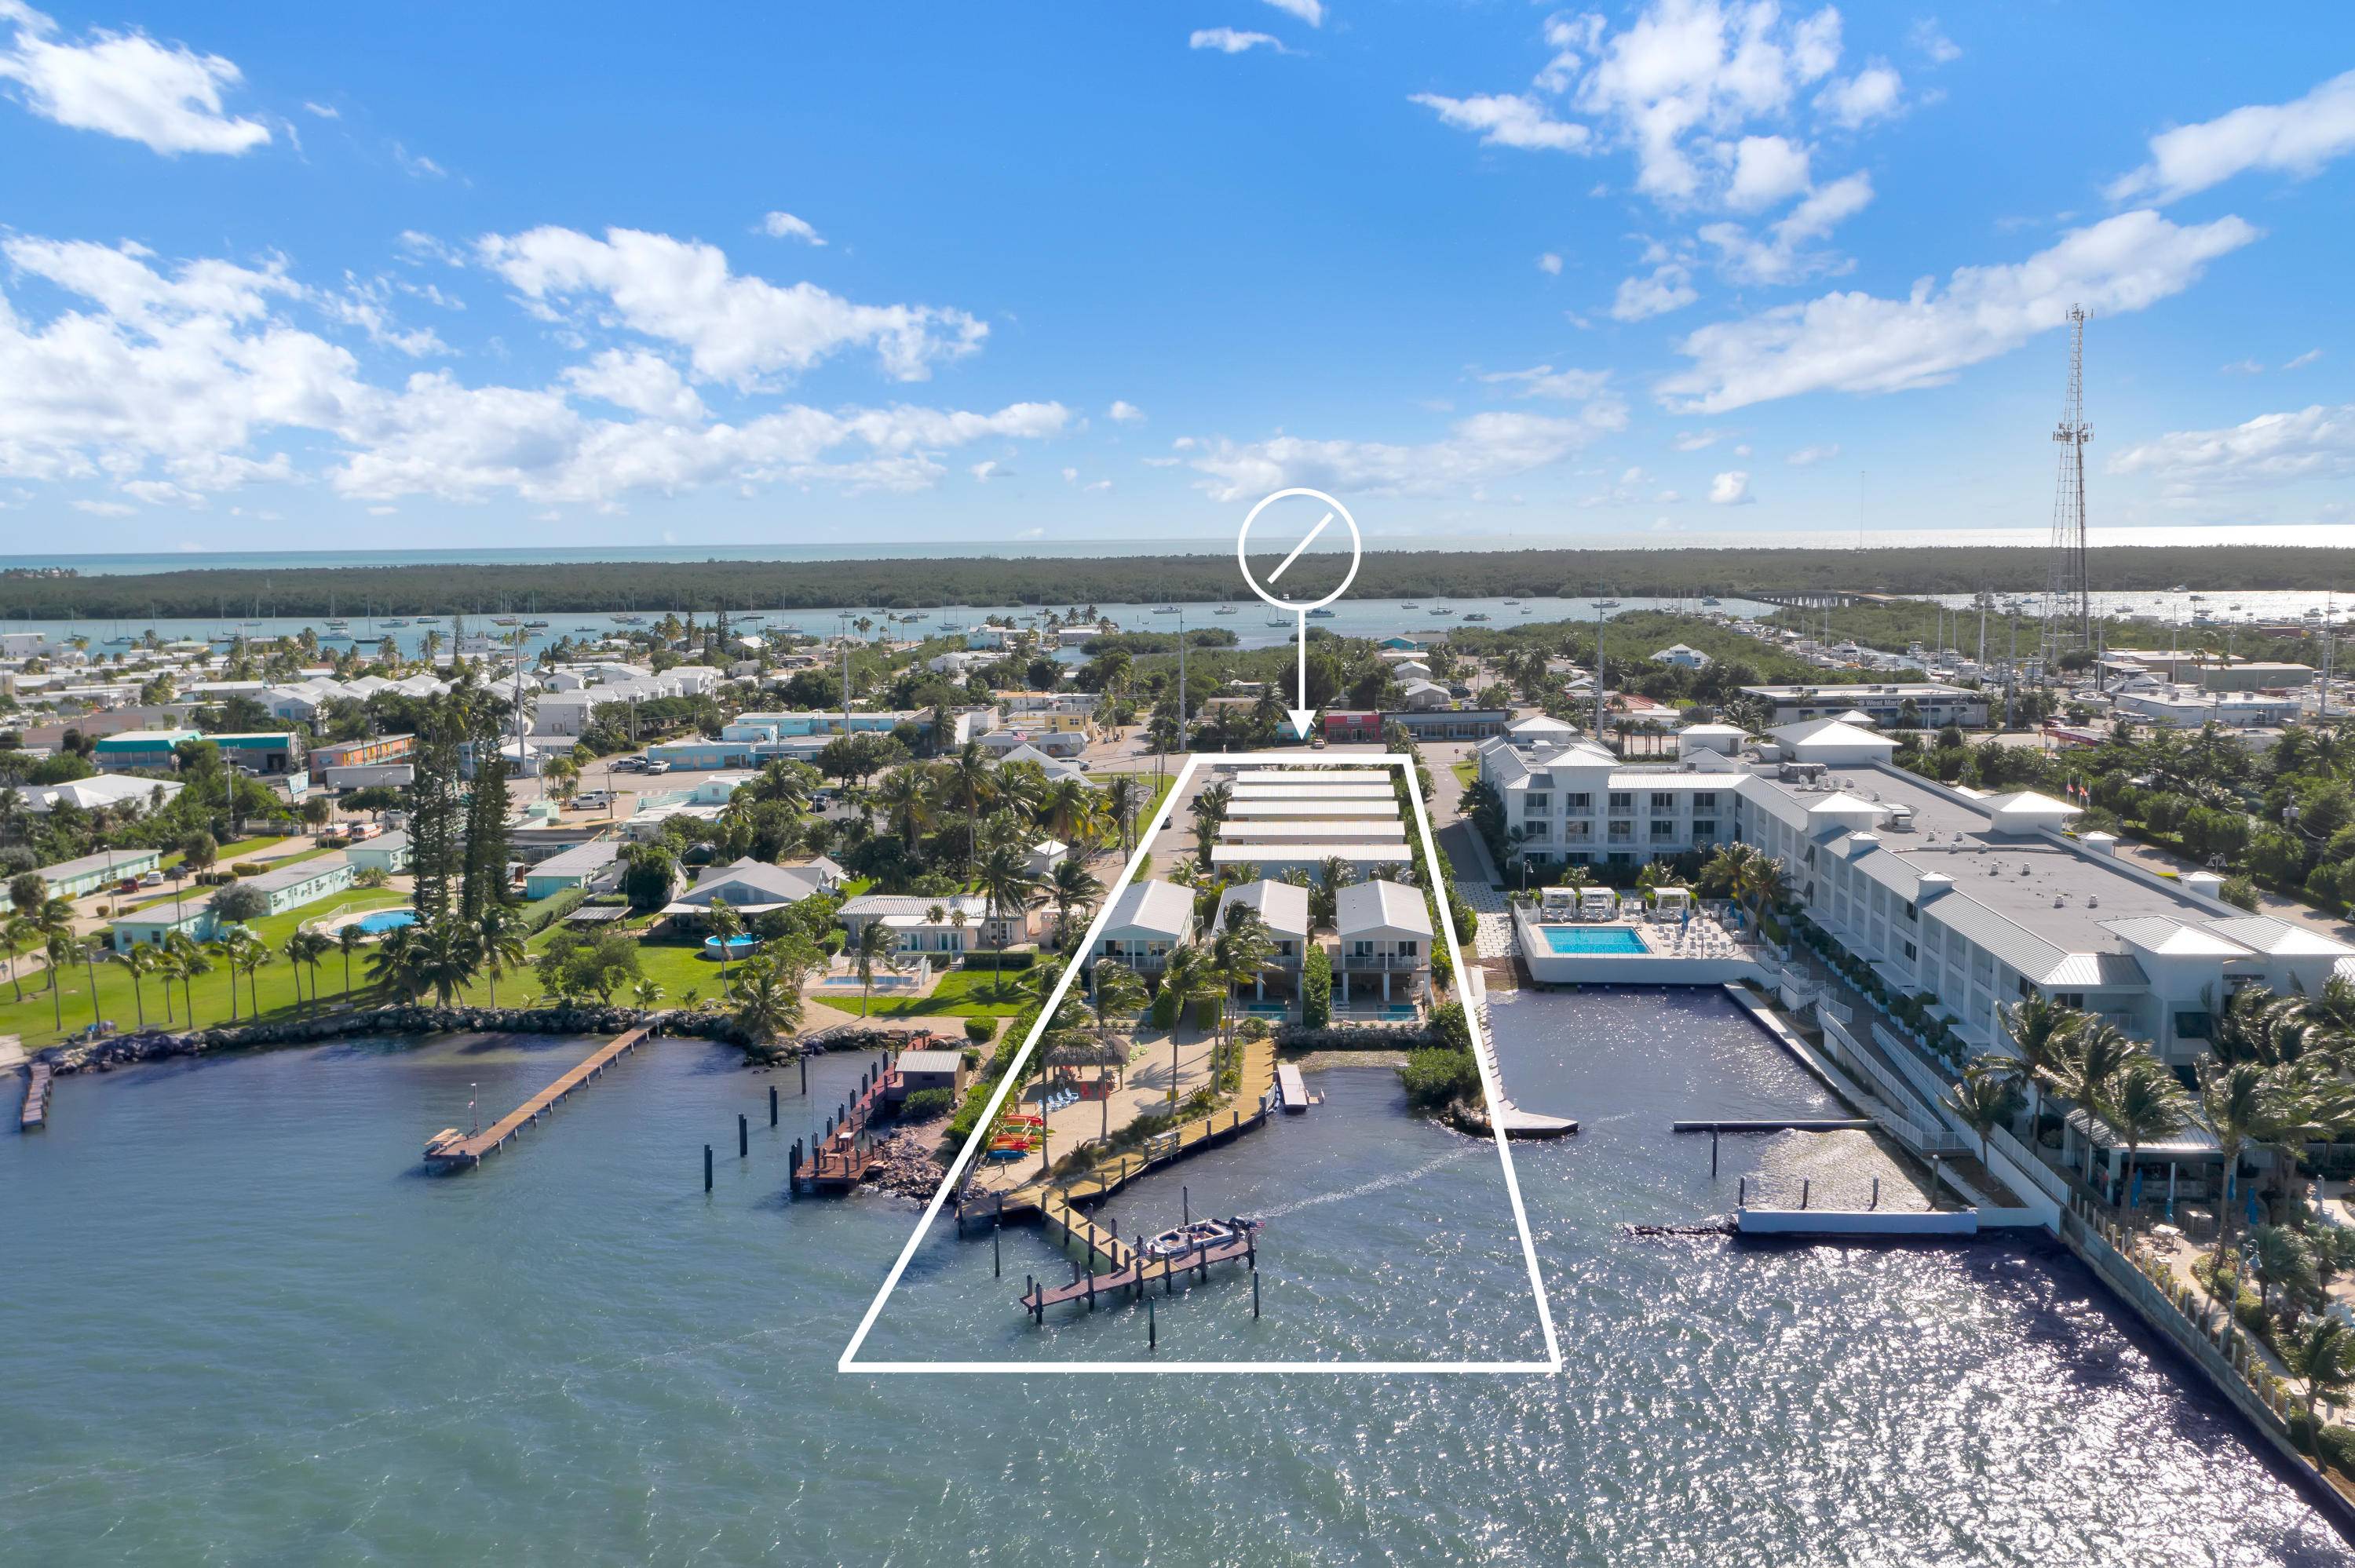 Built in 2018, turnkey waterfront vacation rental development comprised of eight single family houses, each with four bedrooms and three full bathrooms built to current windstorm standards.